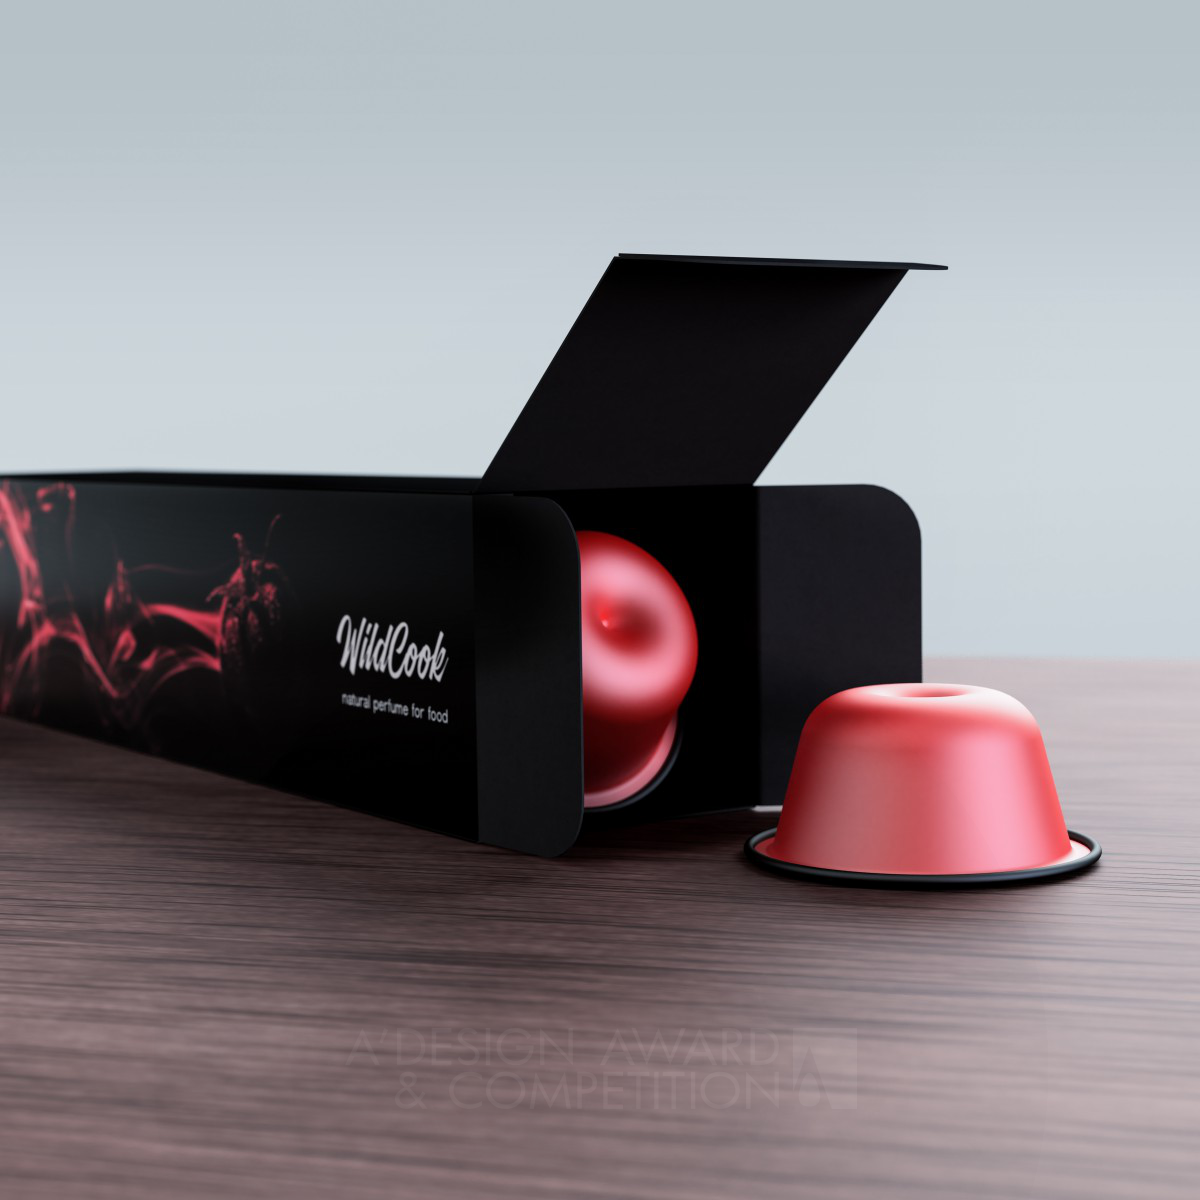 Wild Cook Capsule: A New Way to Smoke and Flavor Your Food